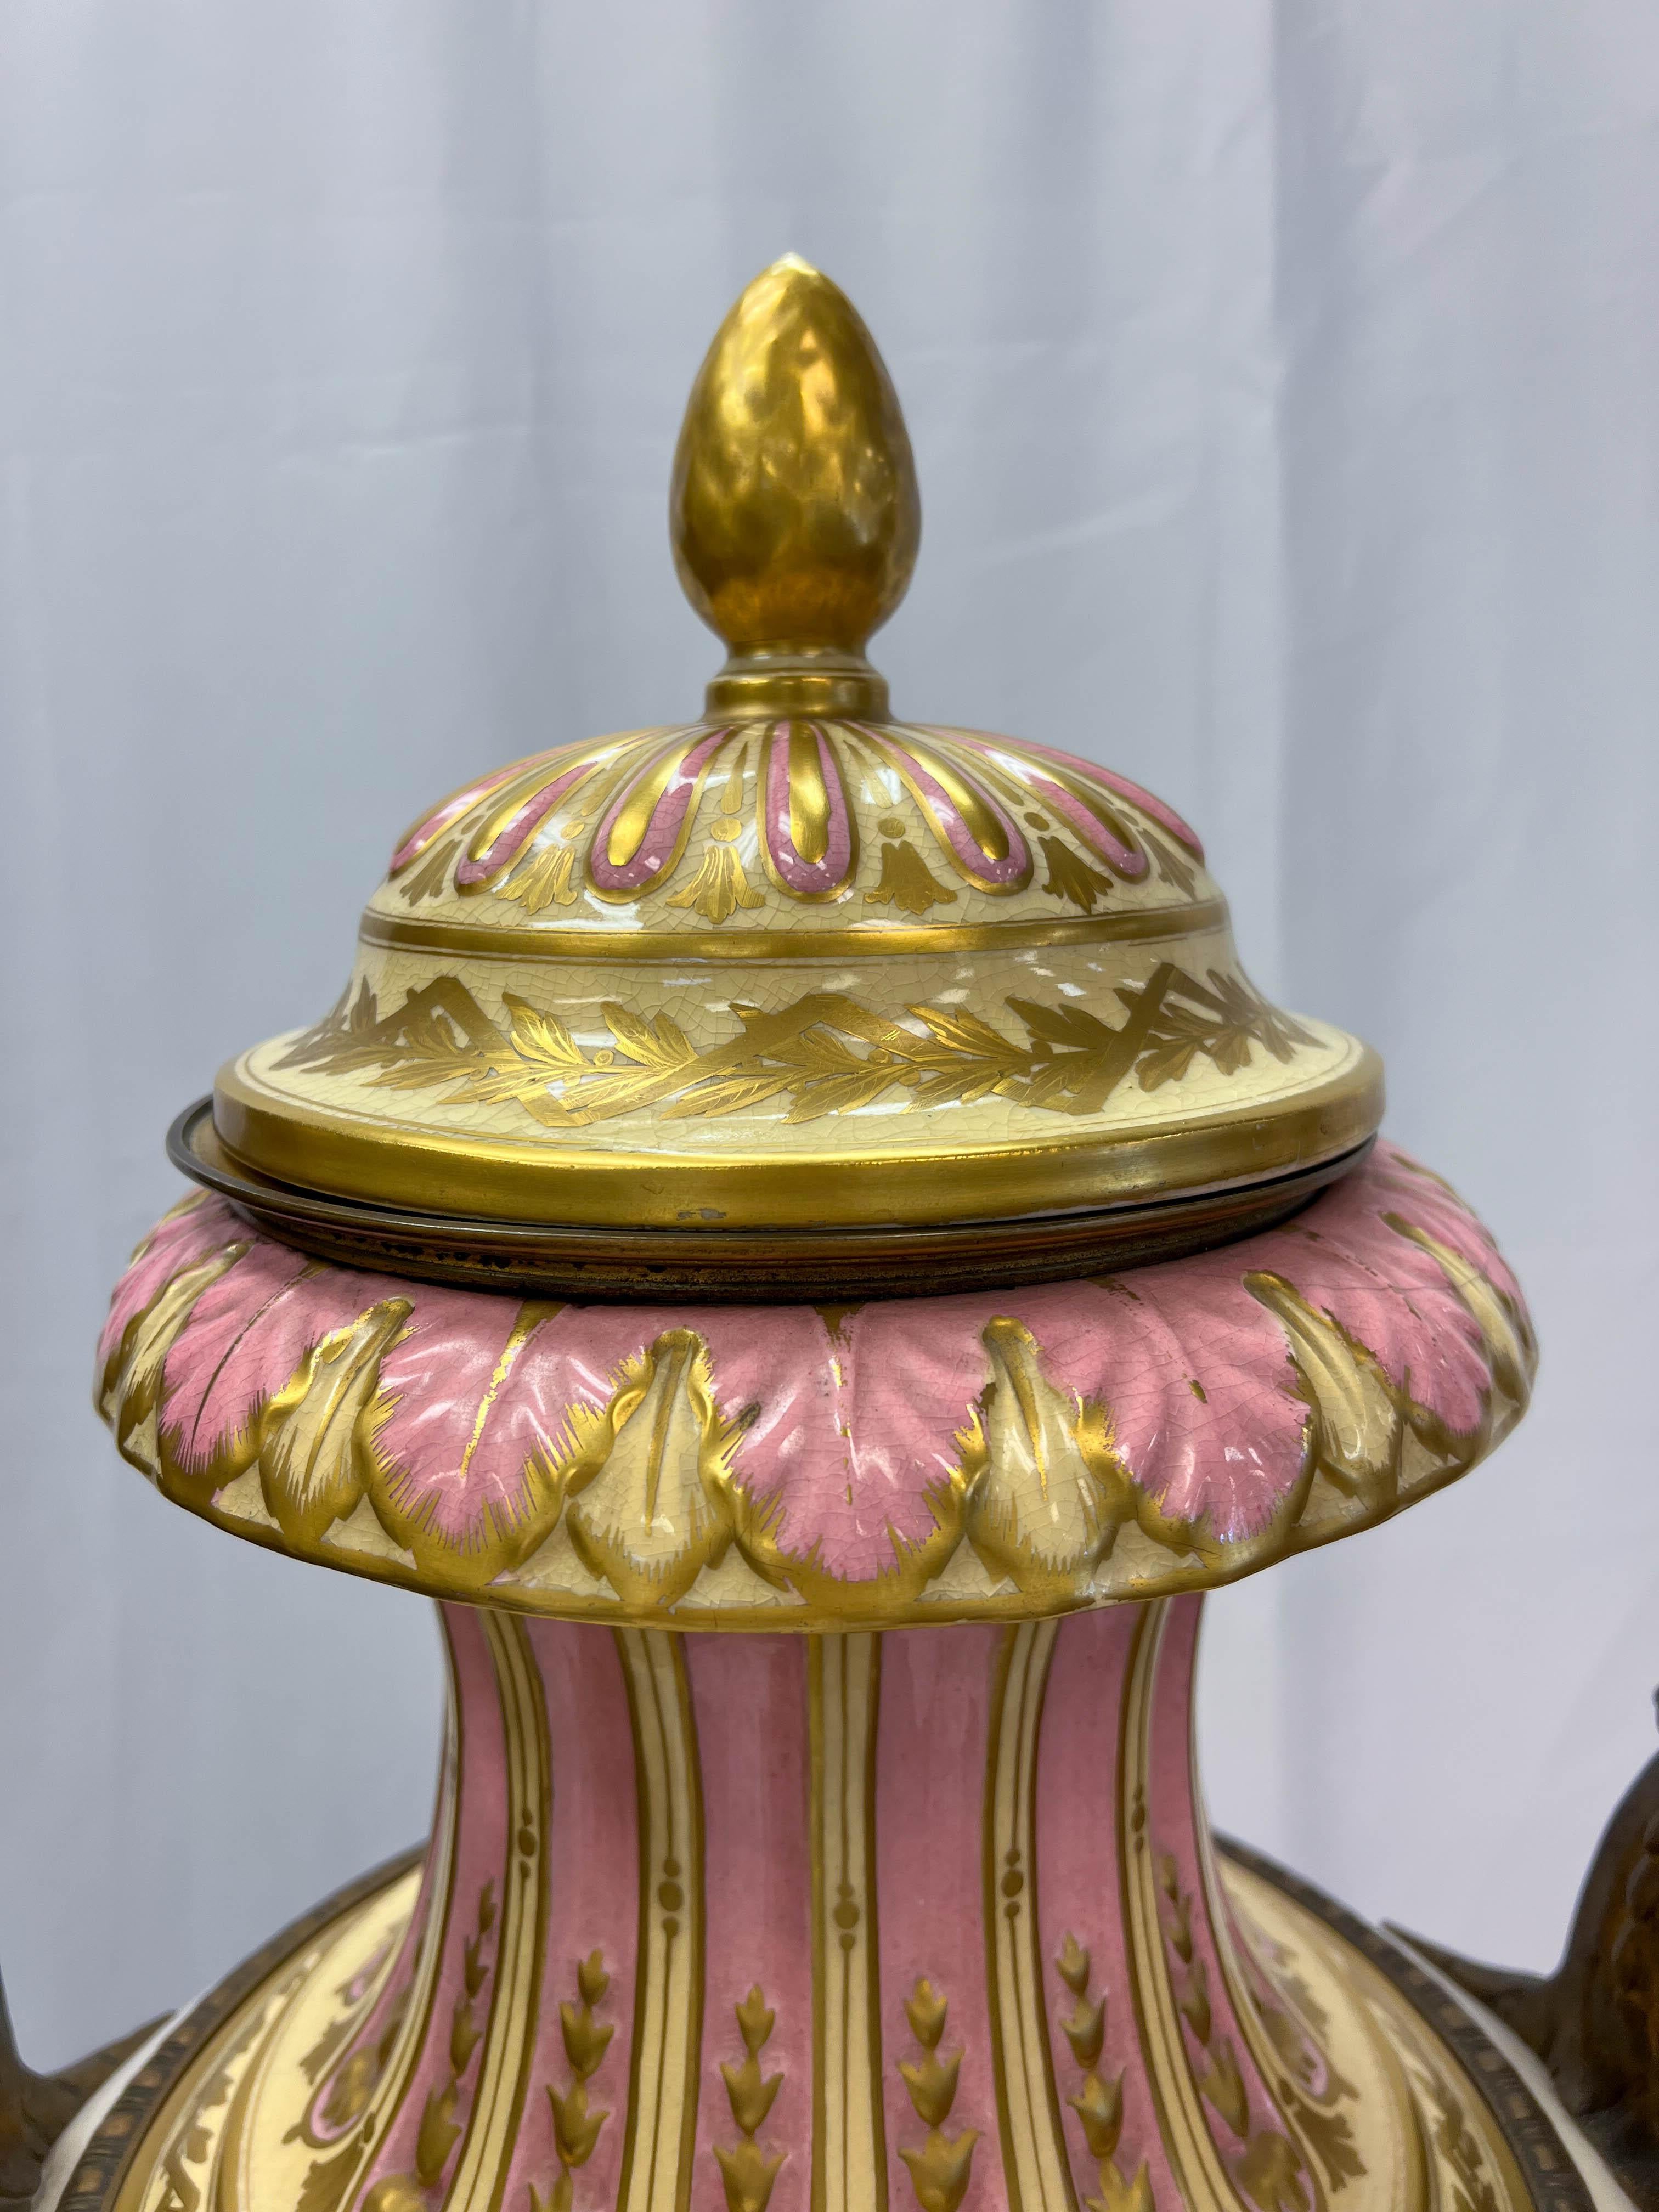 19th Century Large Scale Neoclassical Ormolu Sèvres Urn In Good Condition For Sale In Palm Beach Gardens, FL